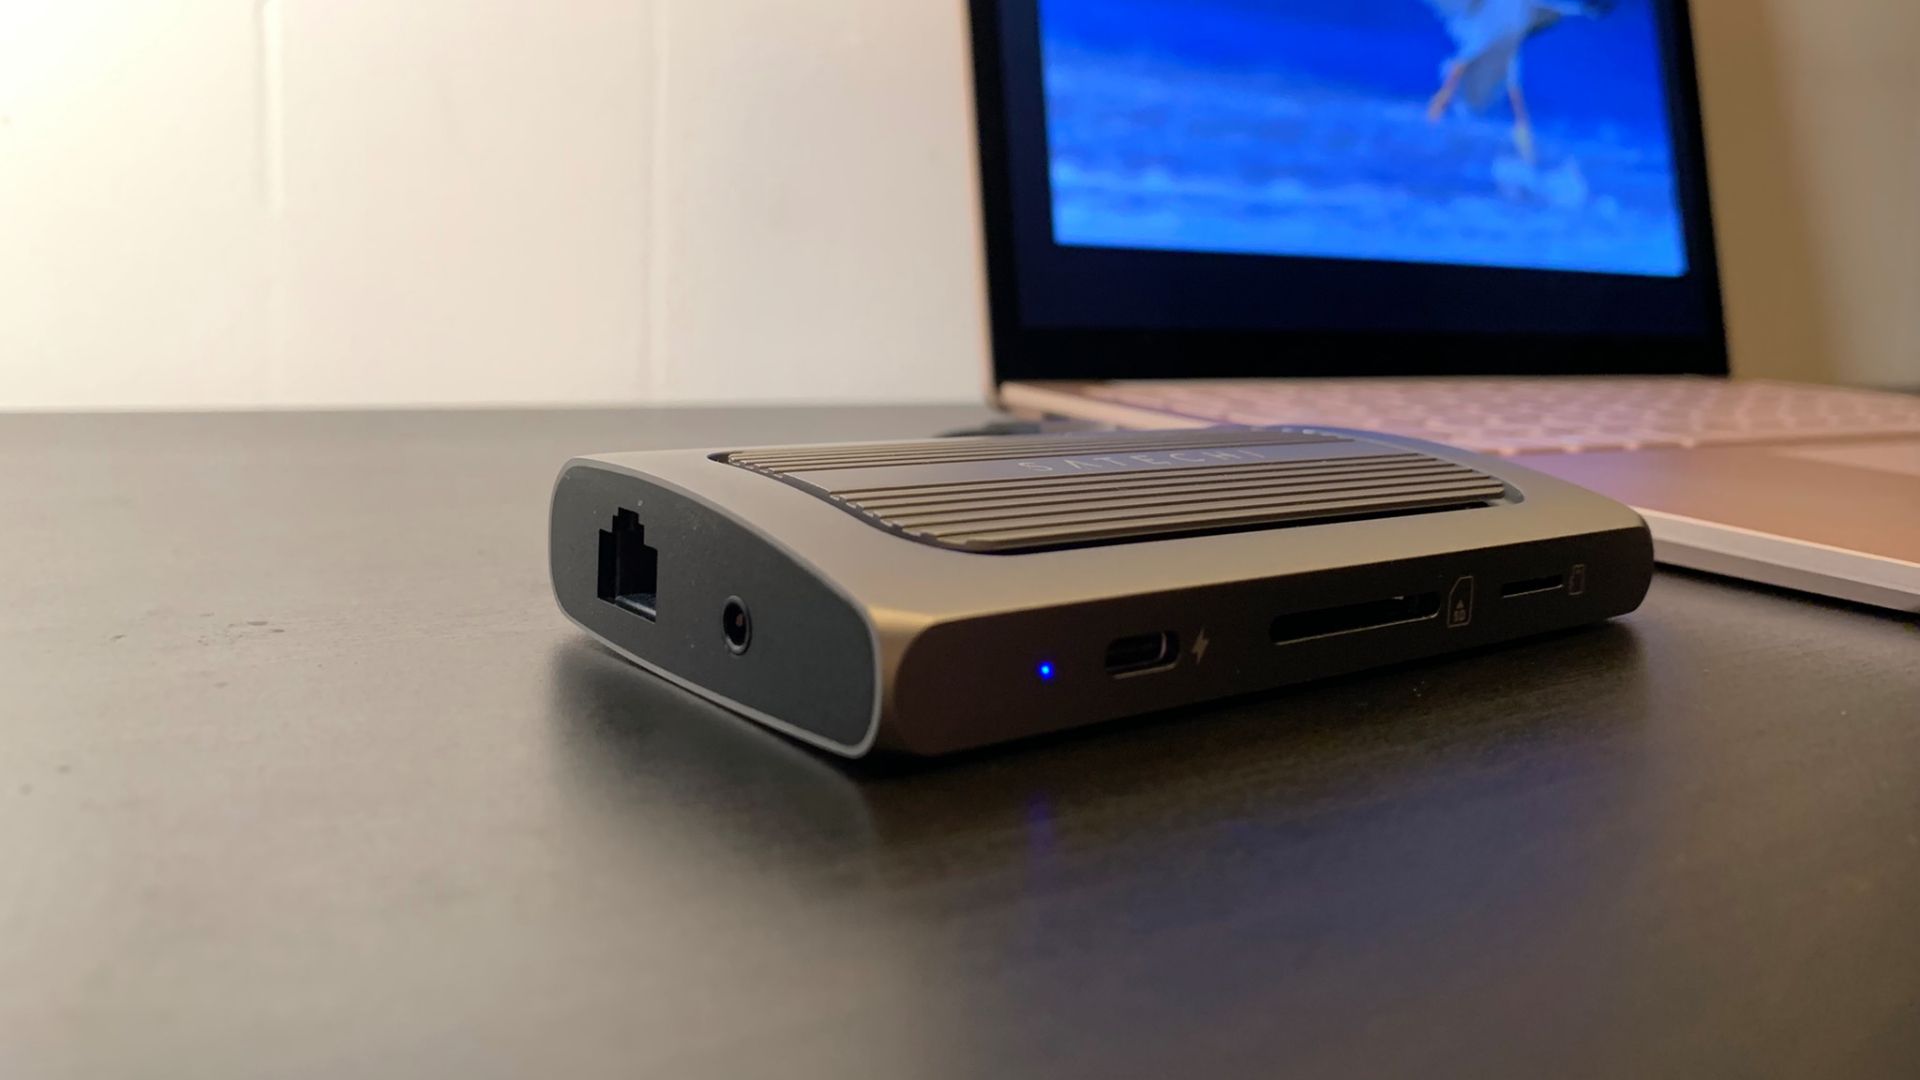 Satechi USB-4 Multiport Adapter with 8K HDMI attached to laptop on desk